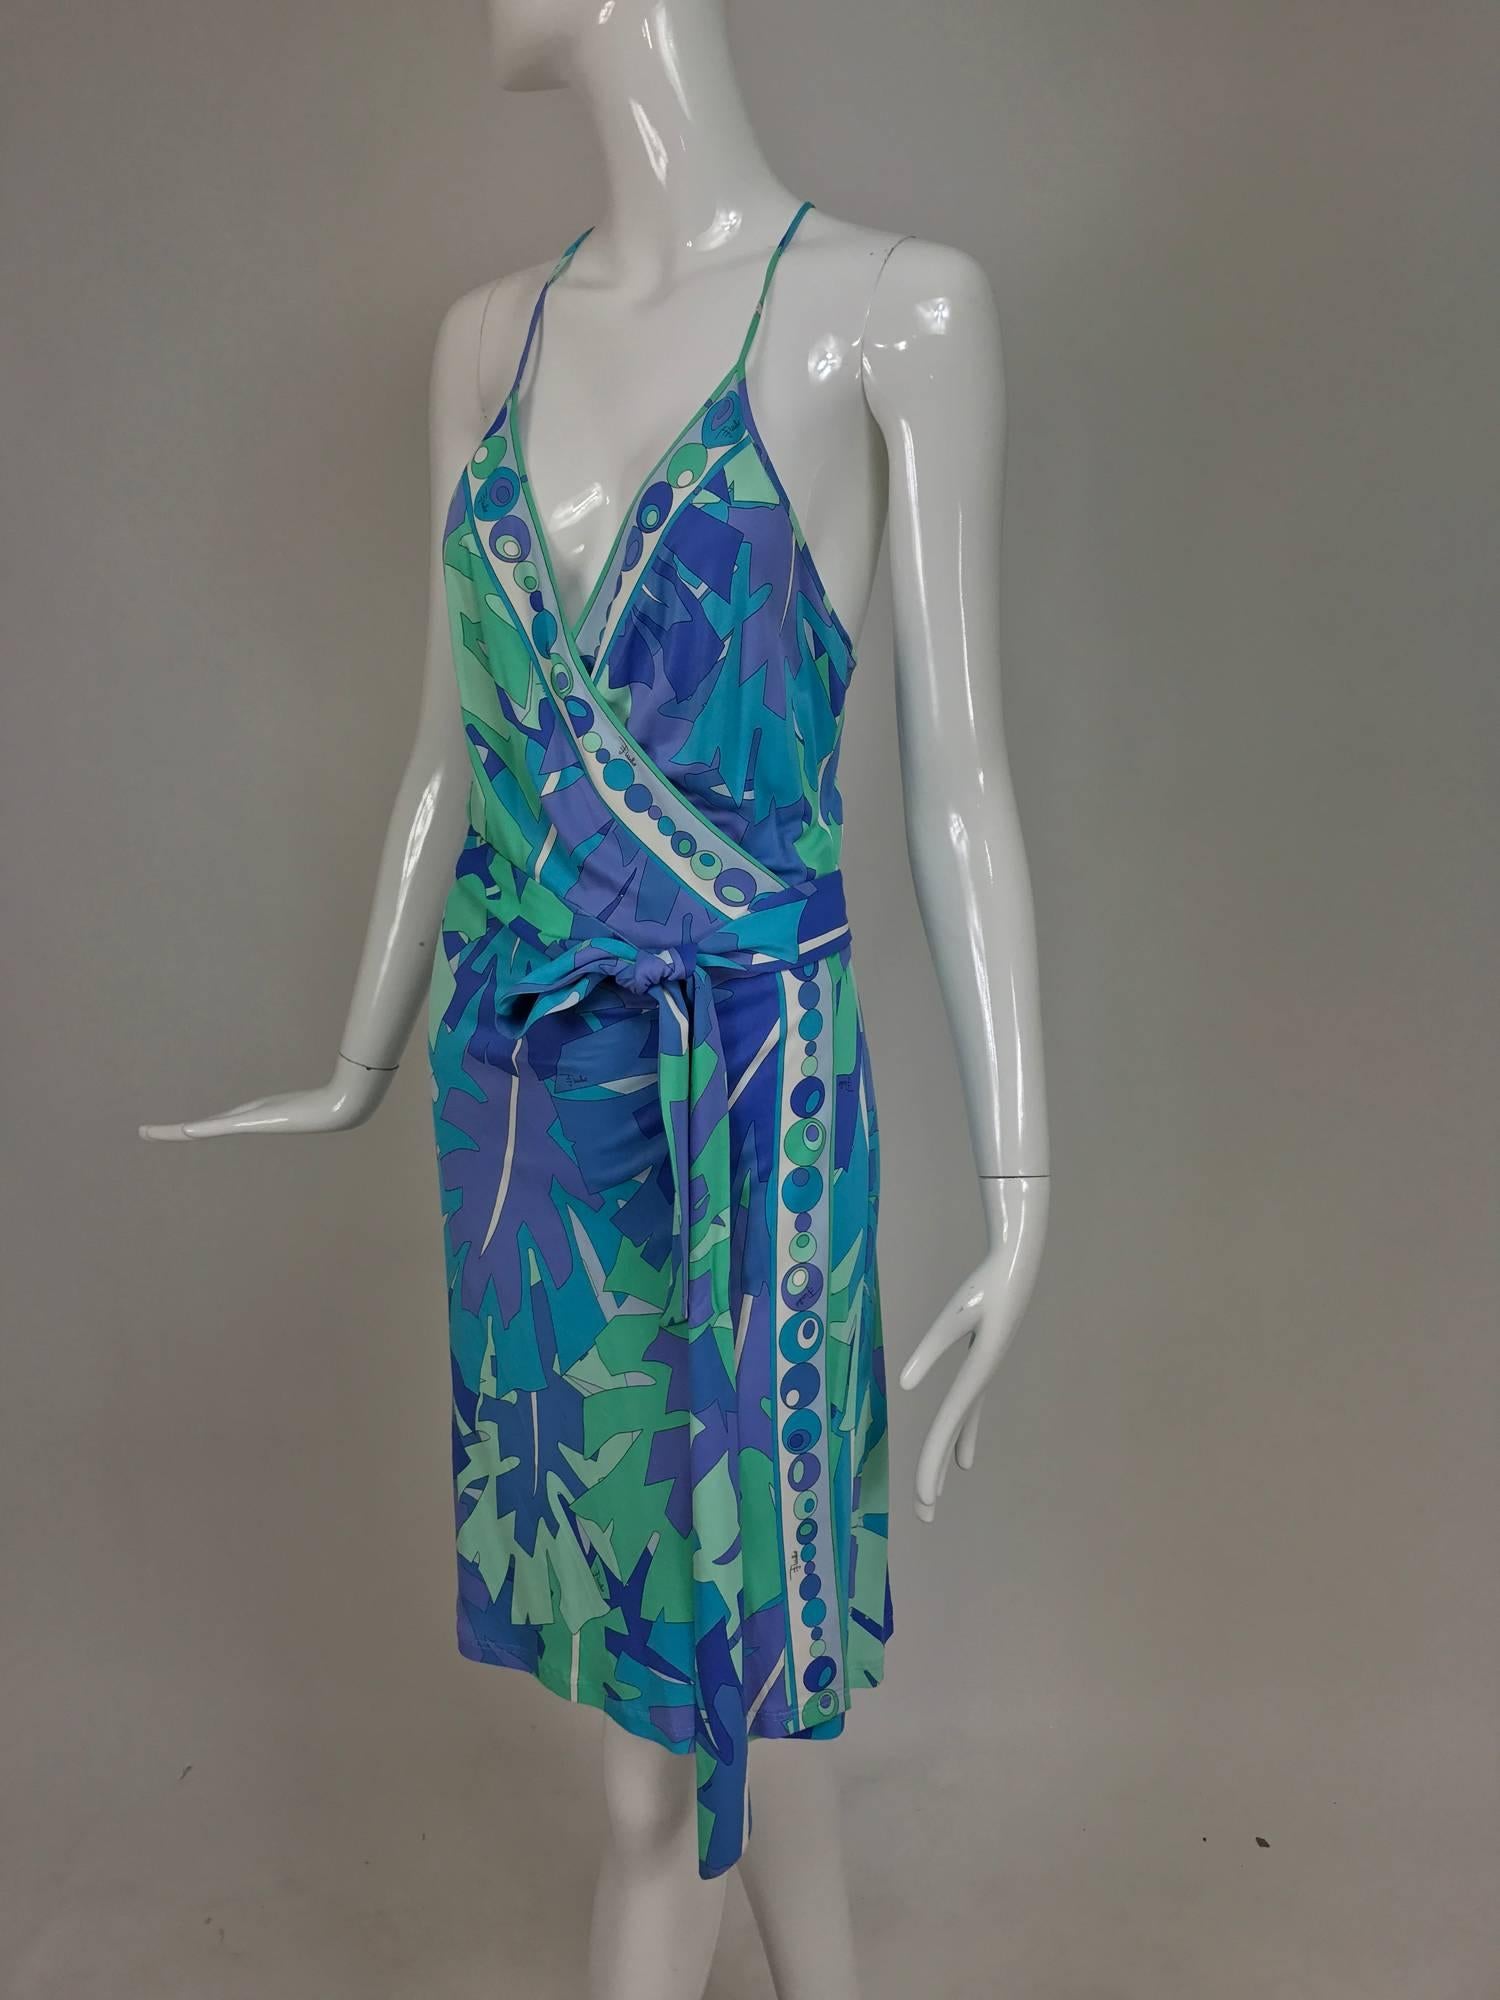 Pucci tropical print silky rayon jersey halter wrap dress in blue, lavender, green, powder blue and aqua...Wrap front with attached side ties, creates a plunge V, racer back...Marked size US10...

In excellent wearable condition... All our clothing